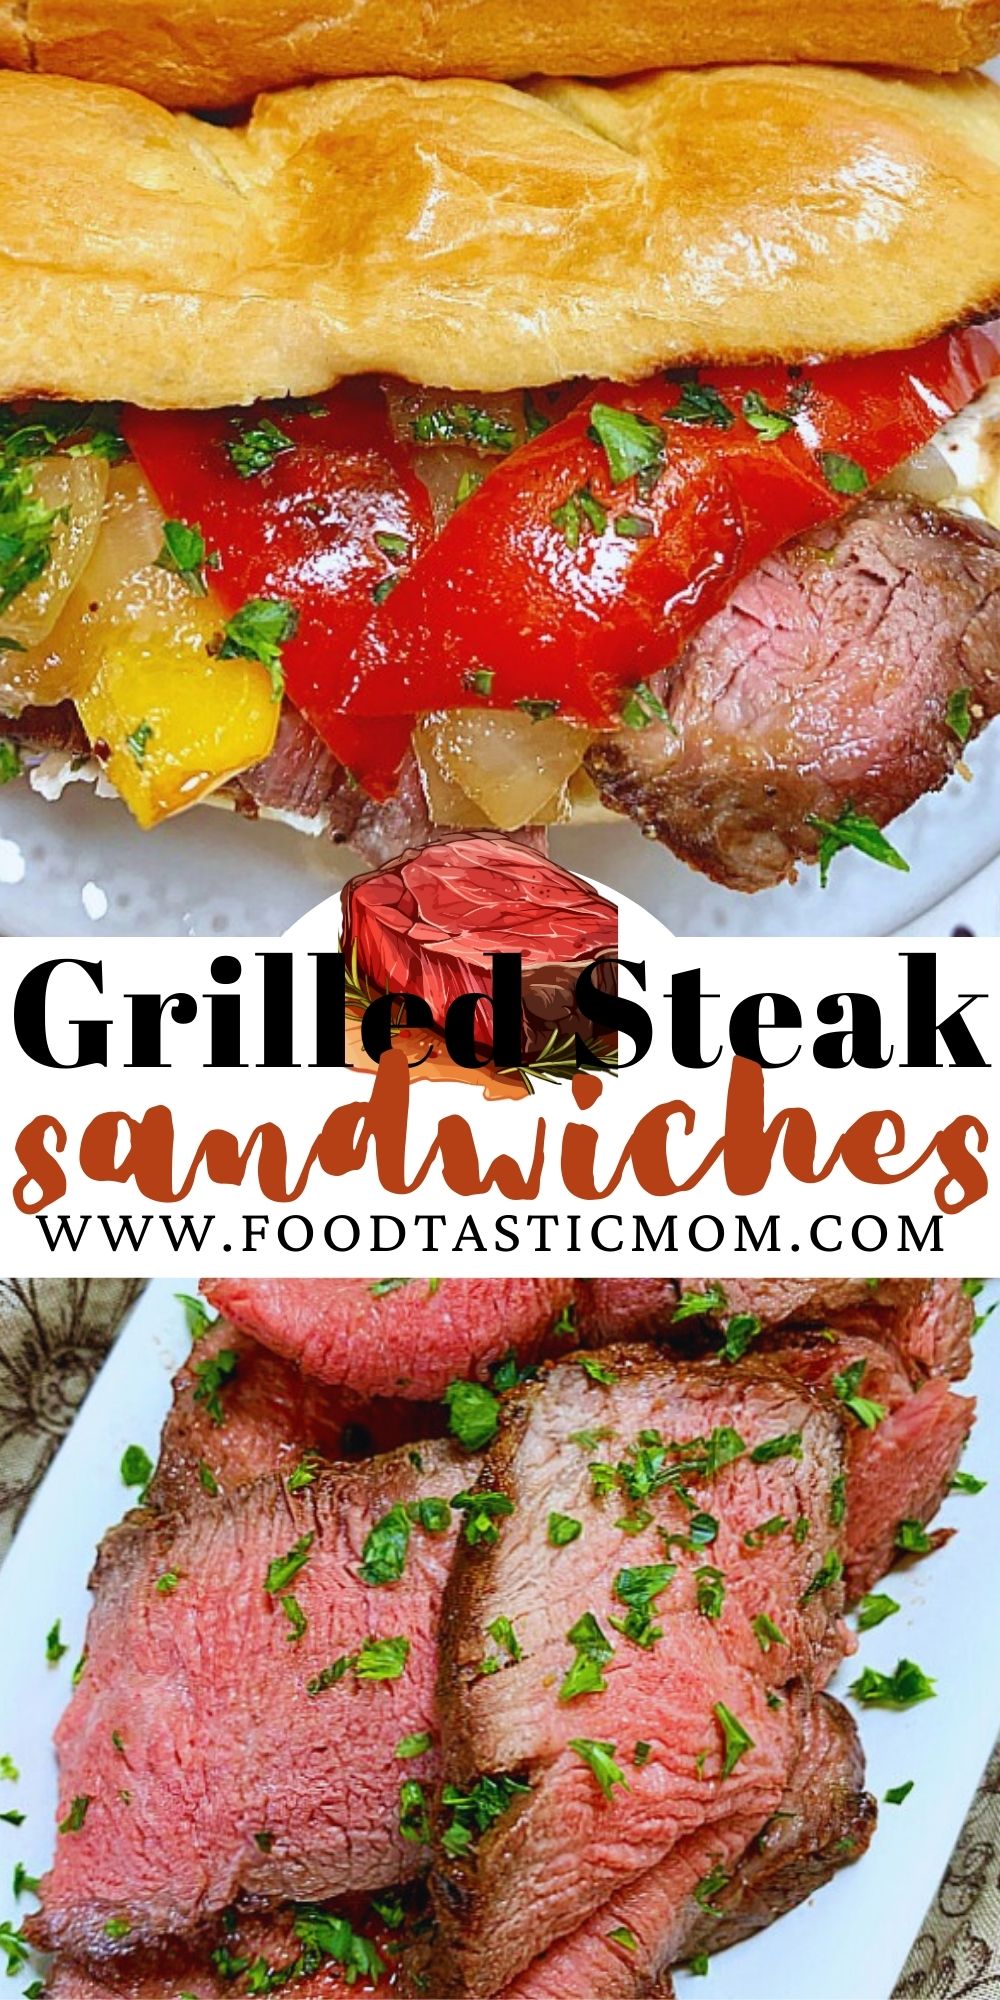 Perfectly grilled filet mignon steaks combine with grilled peppers and onions and Boursin cheese on toasted Brioche buns for these scrumptious Grilled Steak Sandwiches. via @foodtasticmom